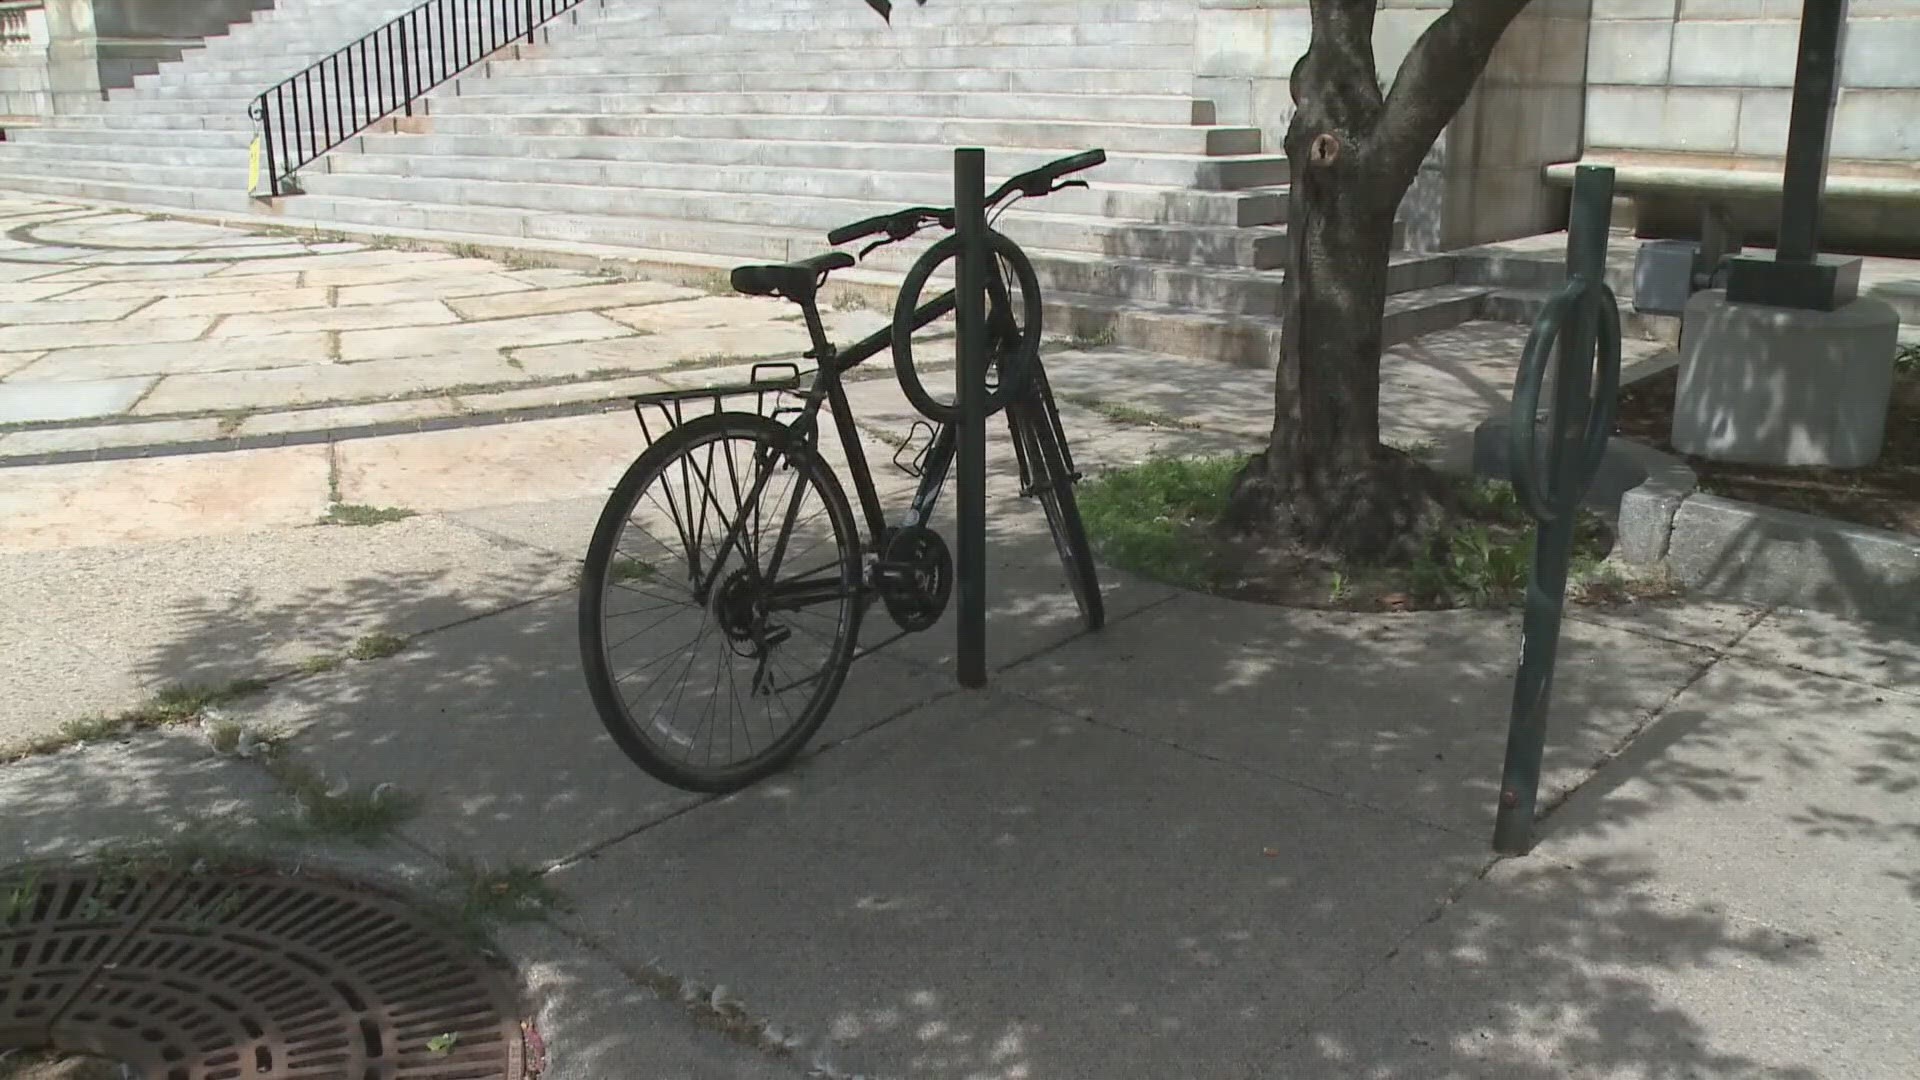 Portland police said in a news release Friday they have fielded around 100 stolen bike reports since June 1.